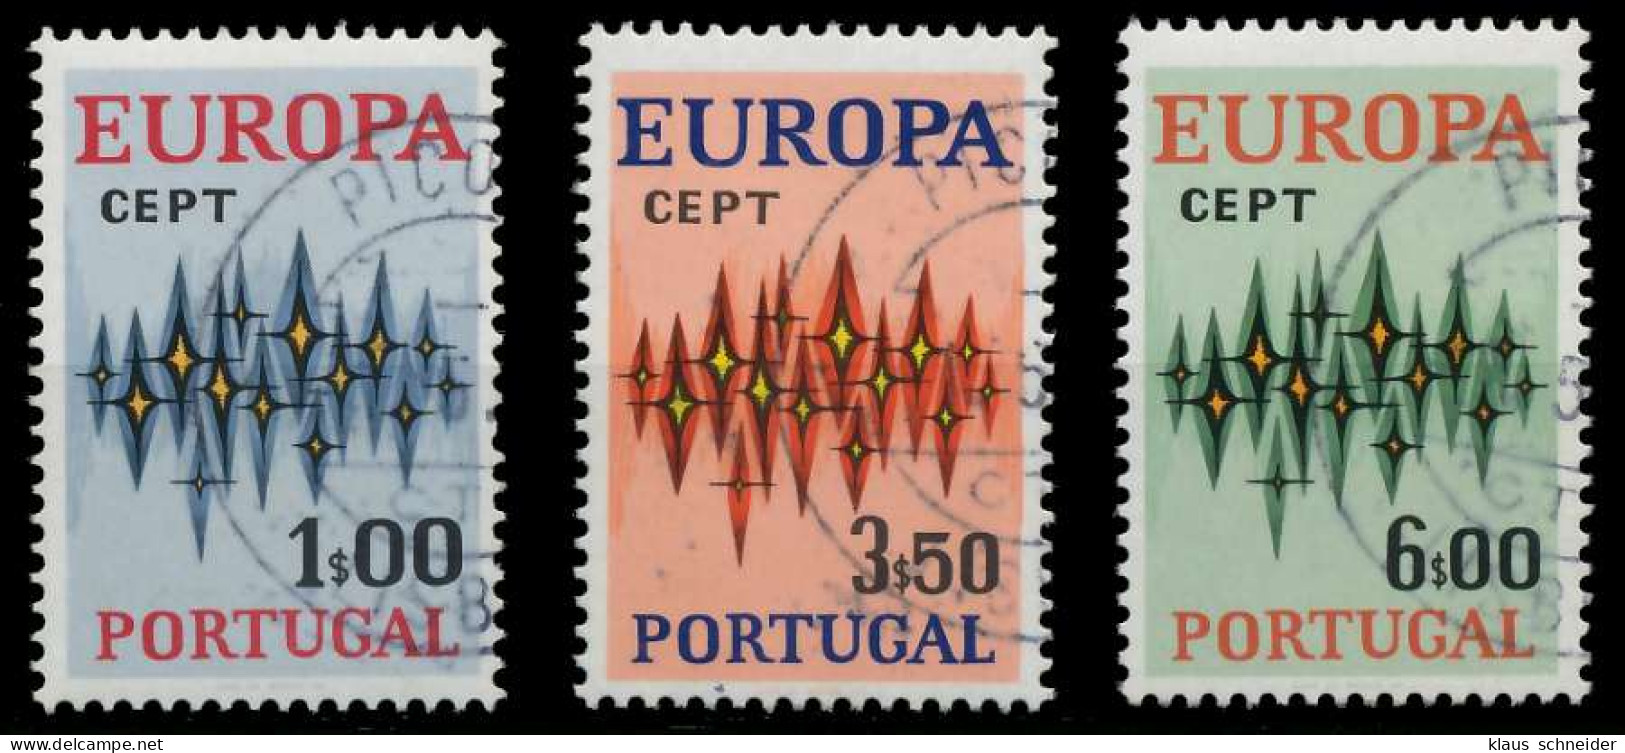 PORTUGAL 1972 Nr 1166-1168 Gestempelt X040386 - Used Stamps